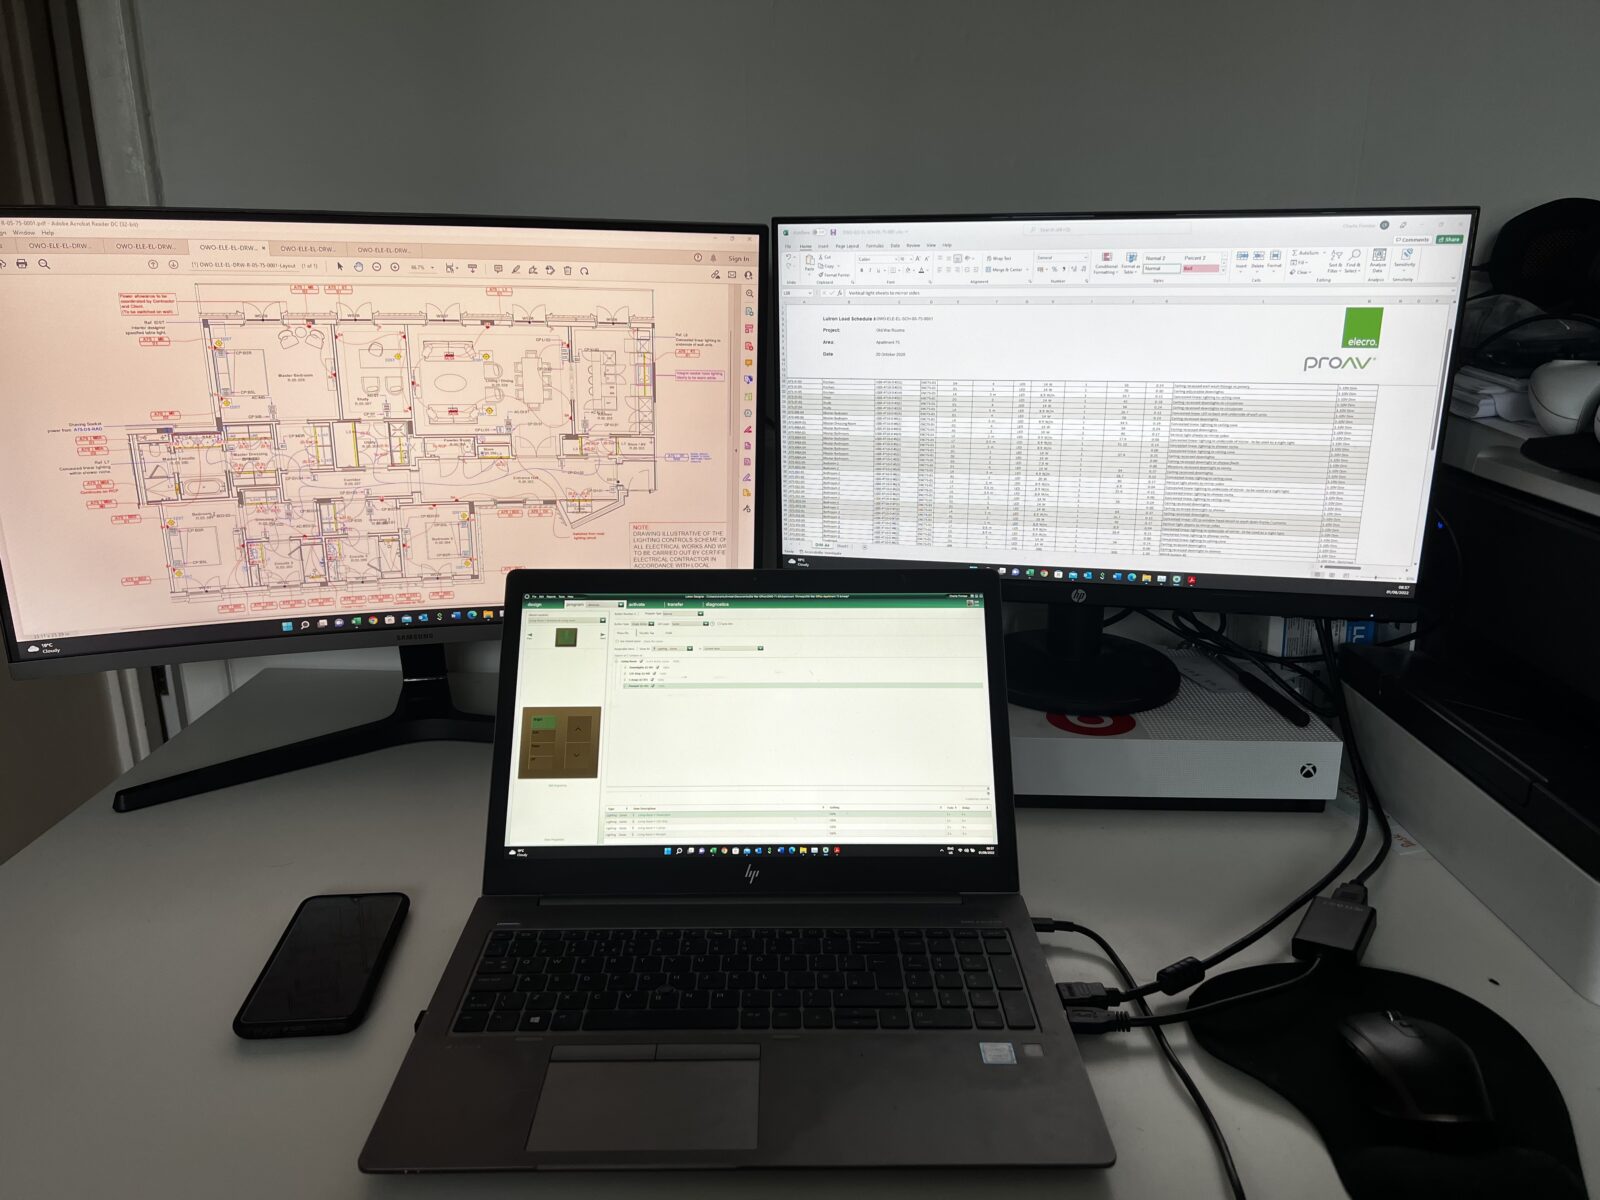 Laptop and 2 computer screens showing spreadsheet and building plans